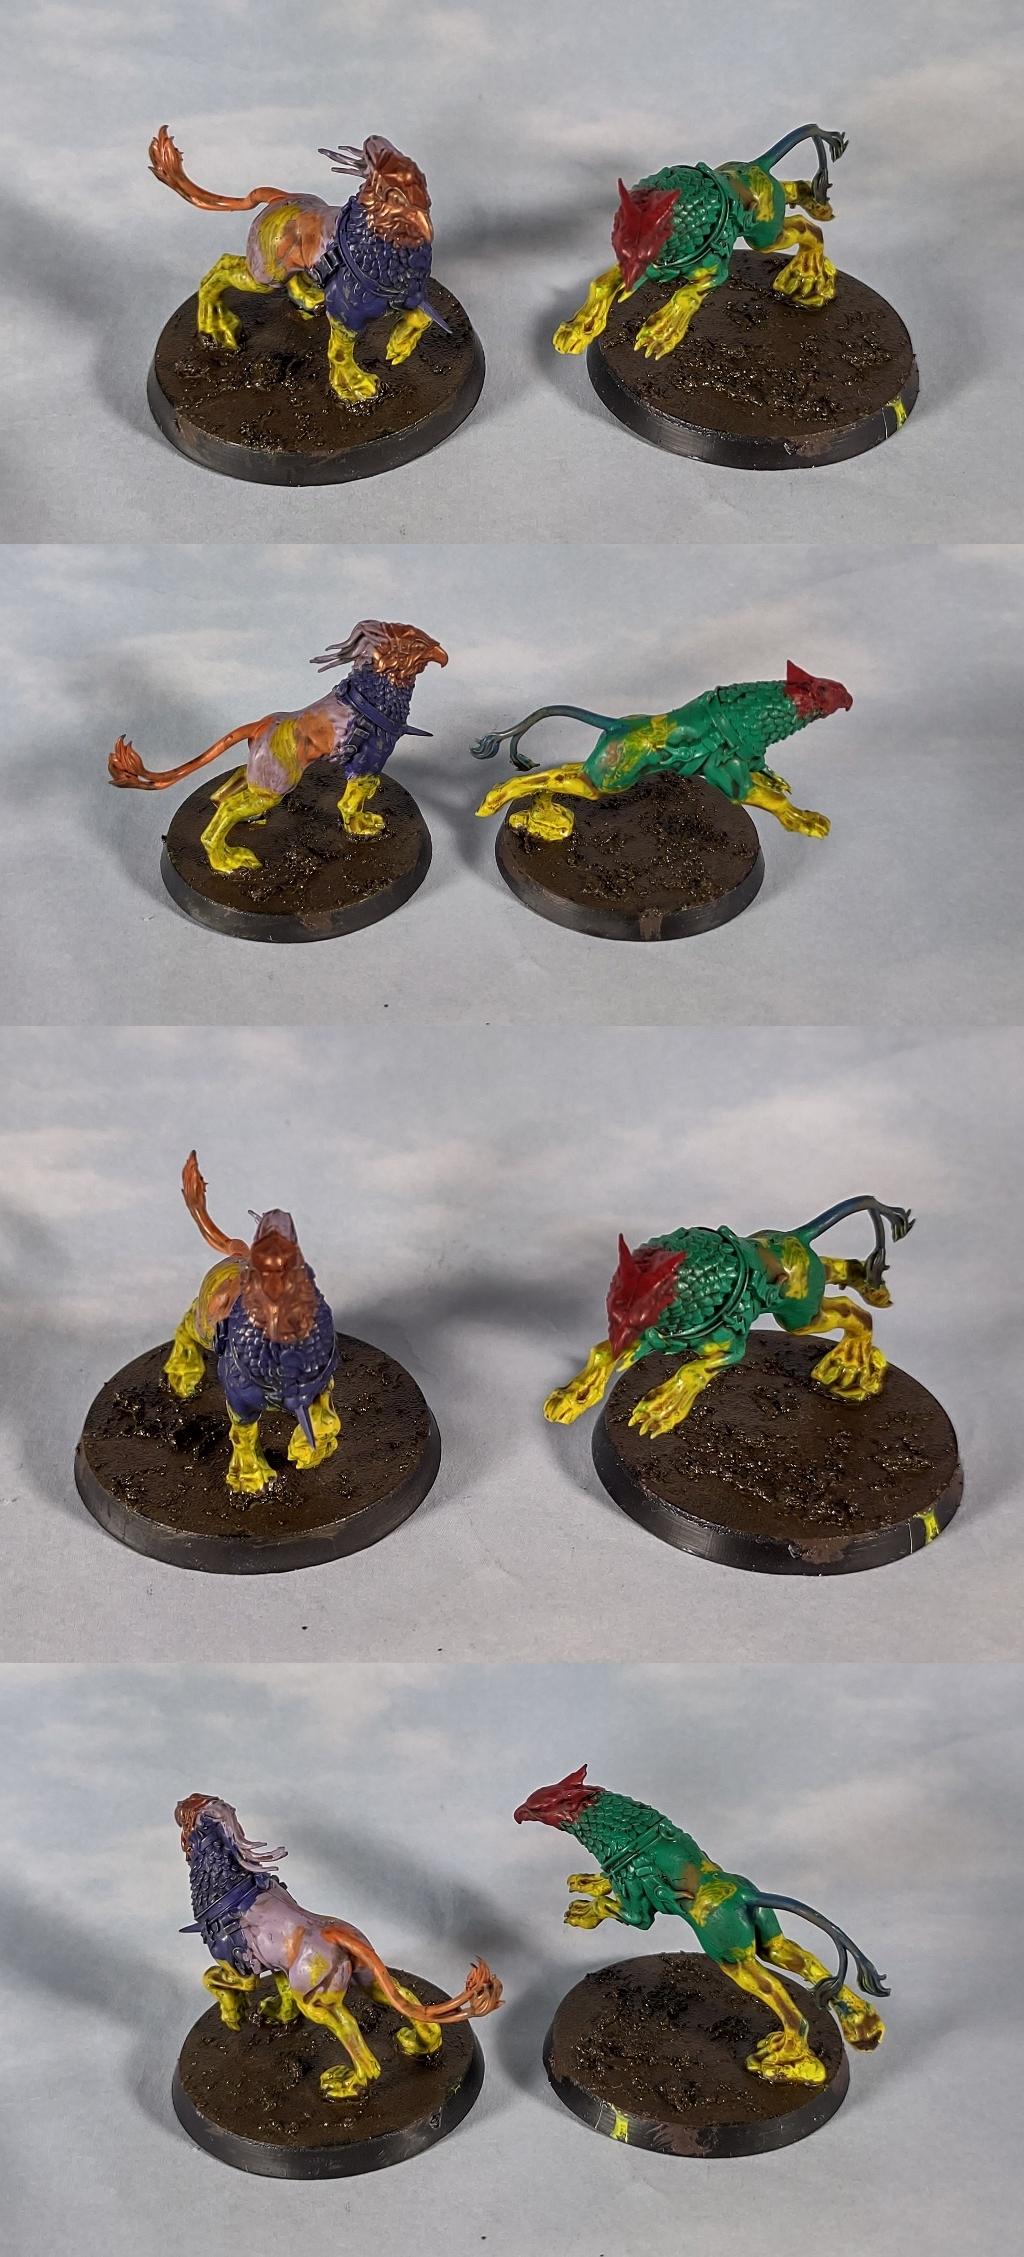 Gryph Hounds, Gryph hounds